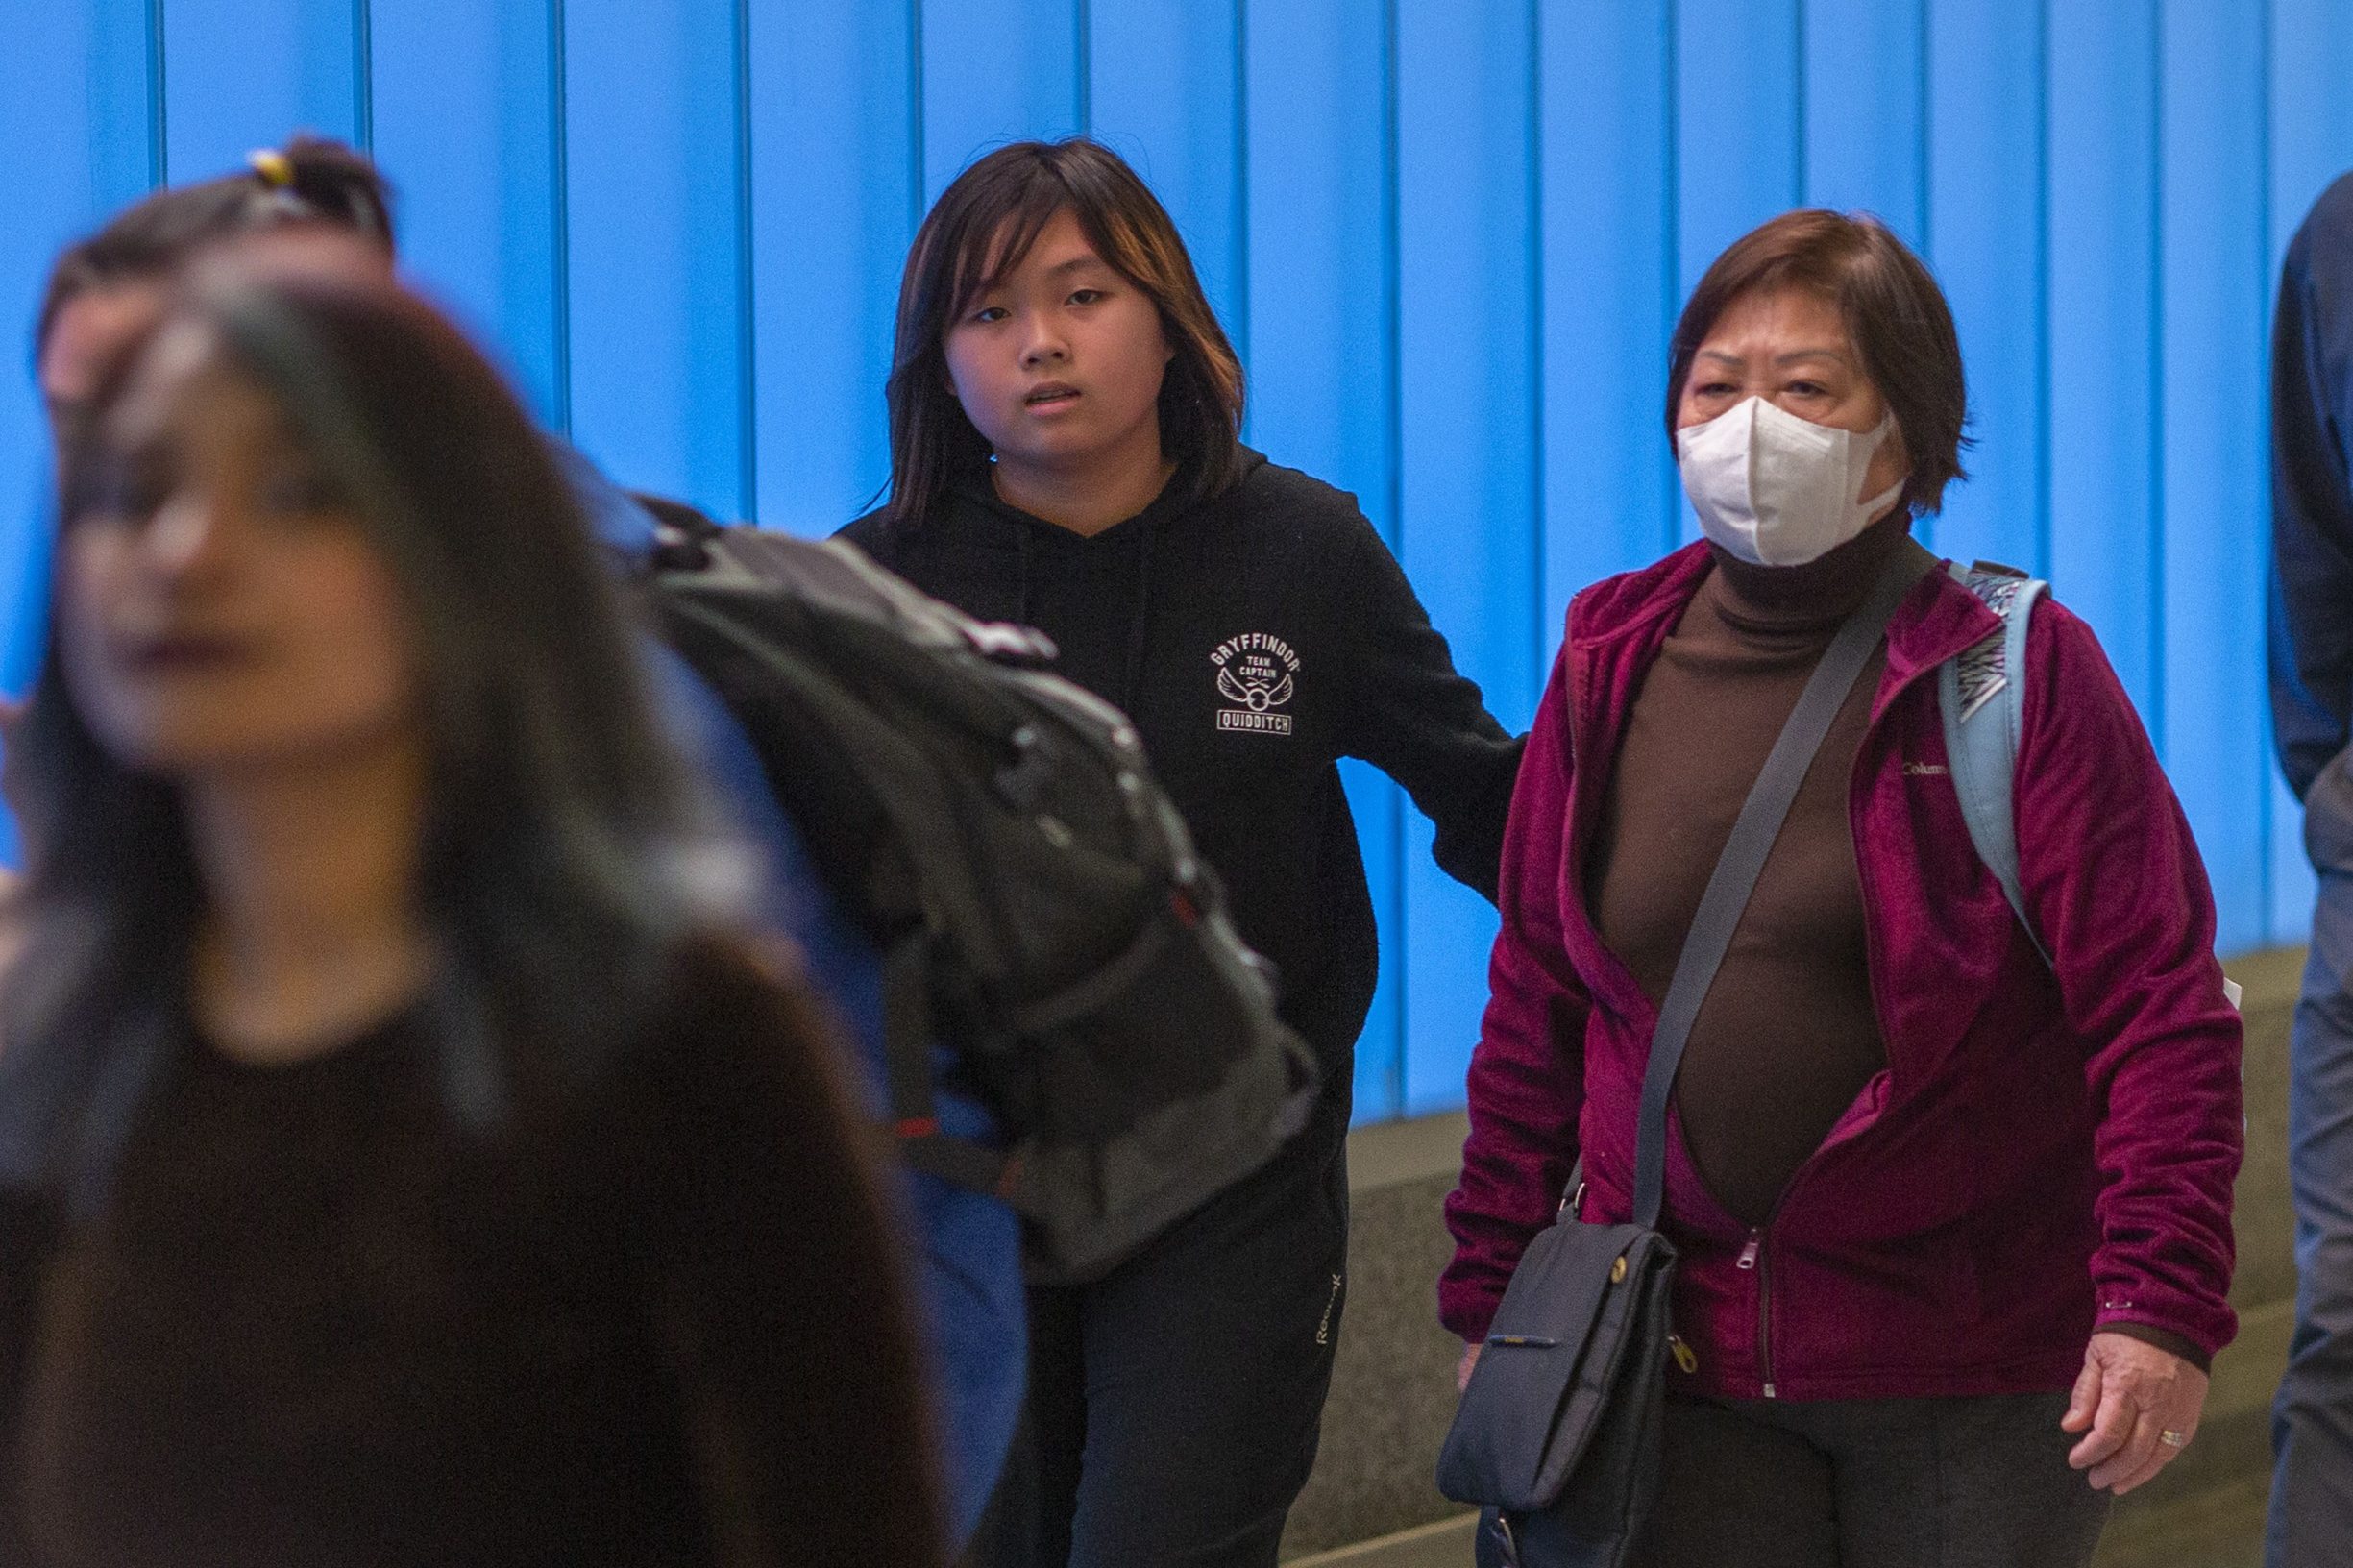 LOS ANGELES, CA - JANUARY 18: A woman arriving on an international flight to Los Angeles International Airport wears a mask on the first day of health screenings for coronavirus of travelers from Wuhan, China on January 18, 2020 in Los Angeles, California. Coronavirus is a new type of virus similar in the same classification as SARS and MERS that has health officials concerned. The outbreak that has infected dozens of people in Wuhan and killed at least two.   David McNew/Getty Images/AFP
== FOR NEWSPAPERS, INTERNET, TELCOS & TELEVISION USE ONLY ==